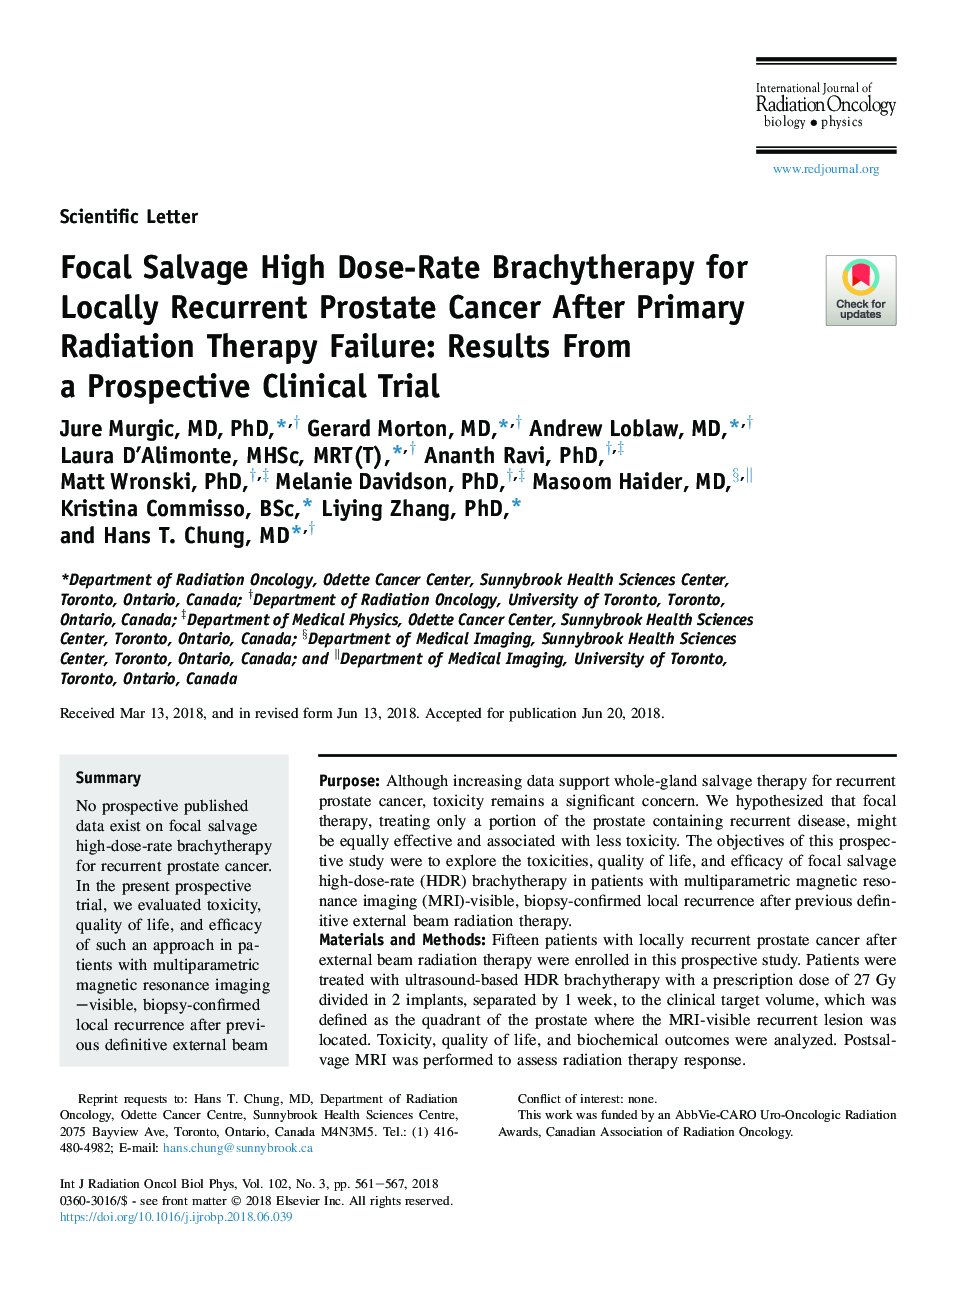 Focal Salvage High Dose-Rate Brachytherapy for Locally Recurrent Prostate Cancer After Primary Radiation Therapy Failure: Results From a Prospective Clinical Trial